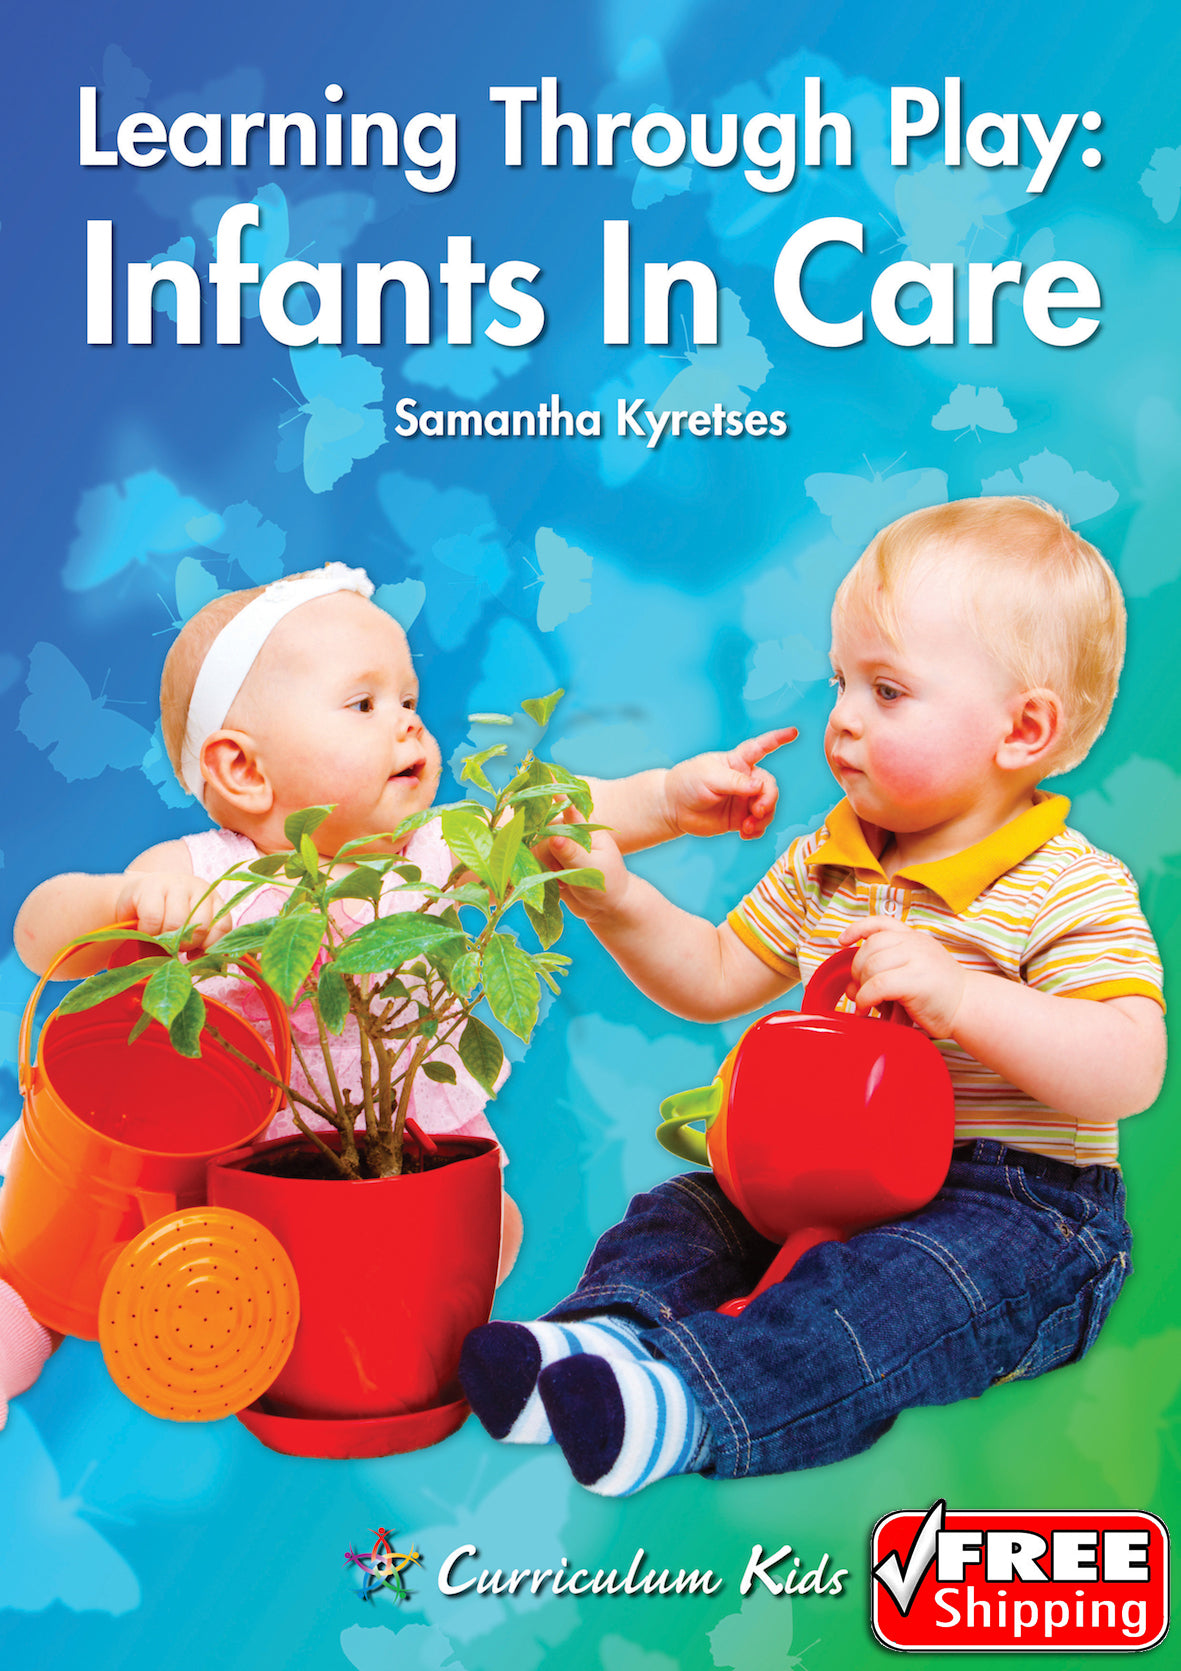 Learning Through Play: Infants In Care